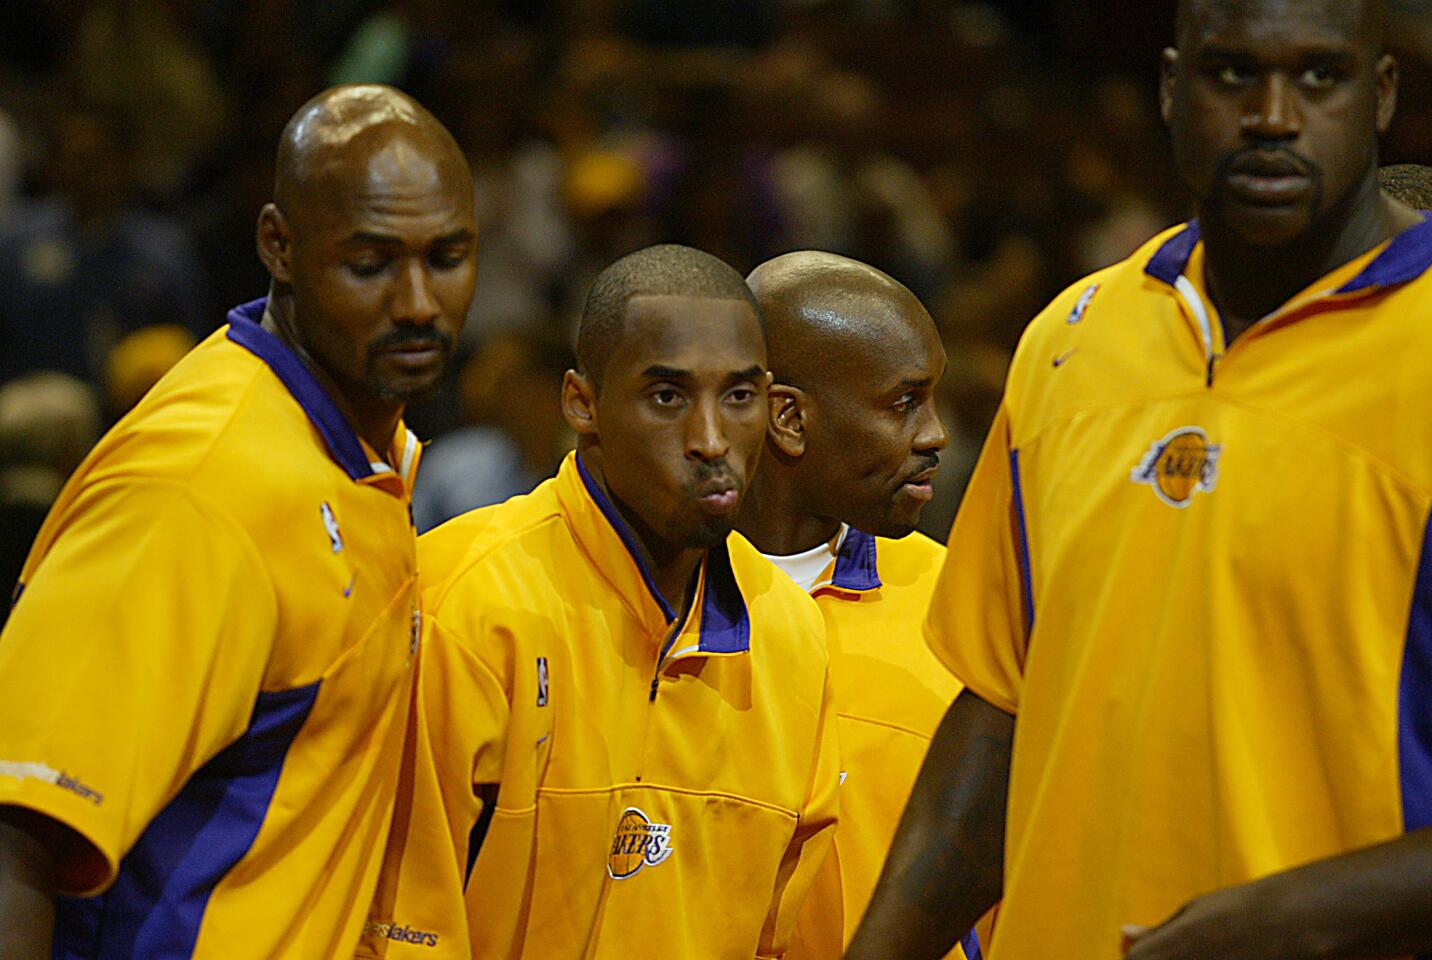 Lakers, from left, Karl Malone, Kobe Bryant, Gary Payton and Shaquille O'Neal.